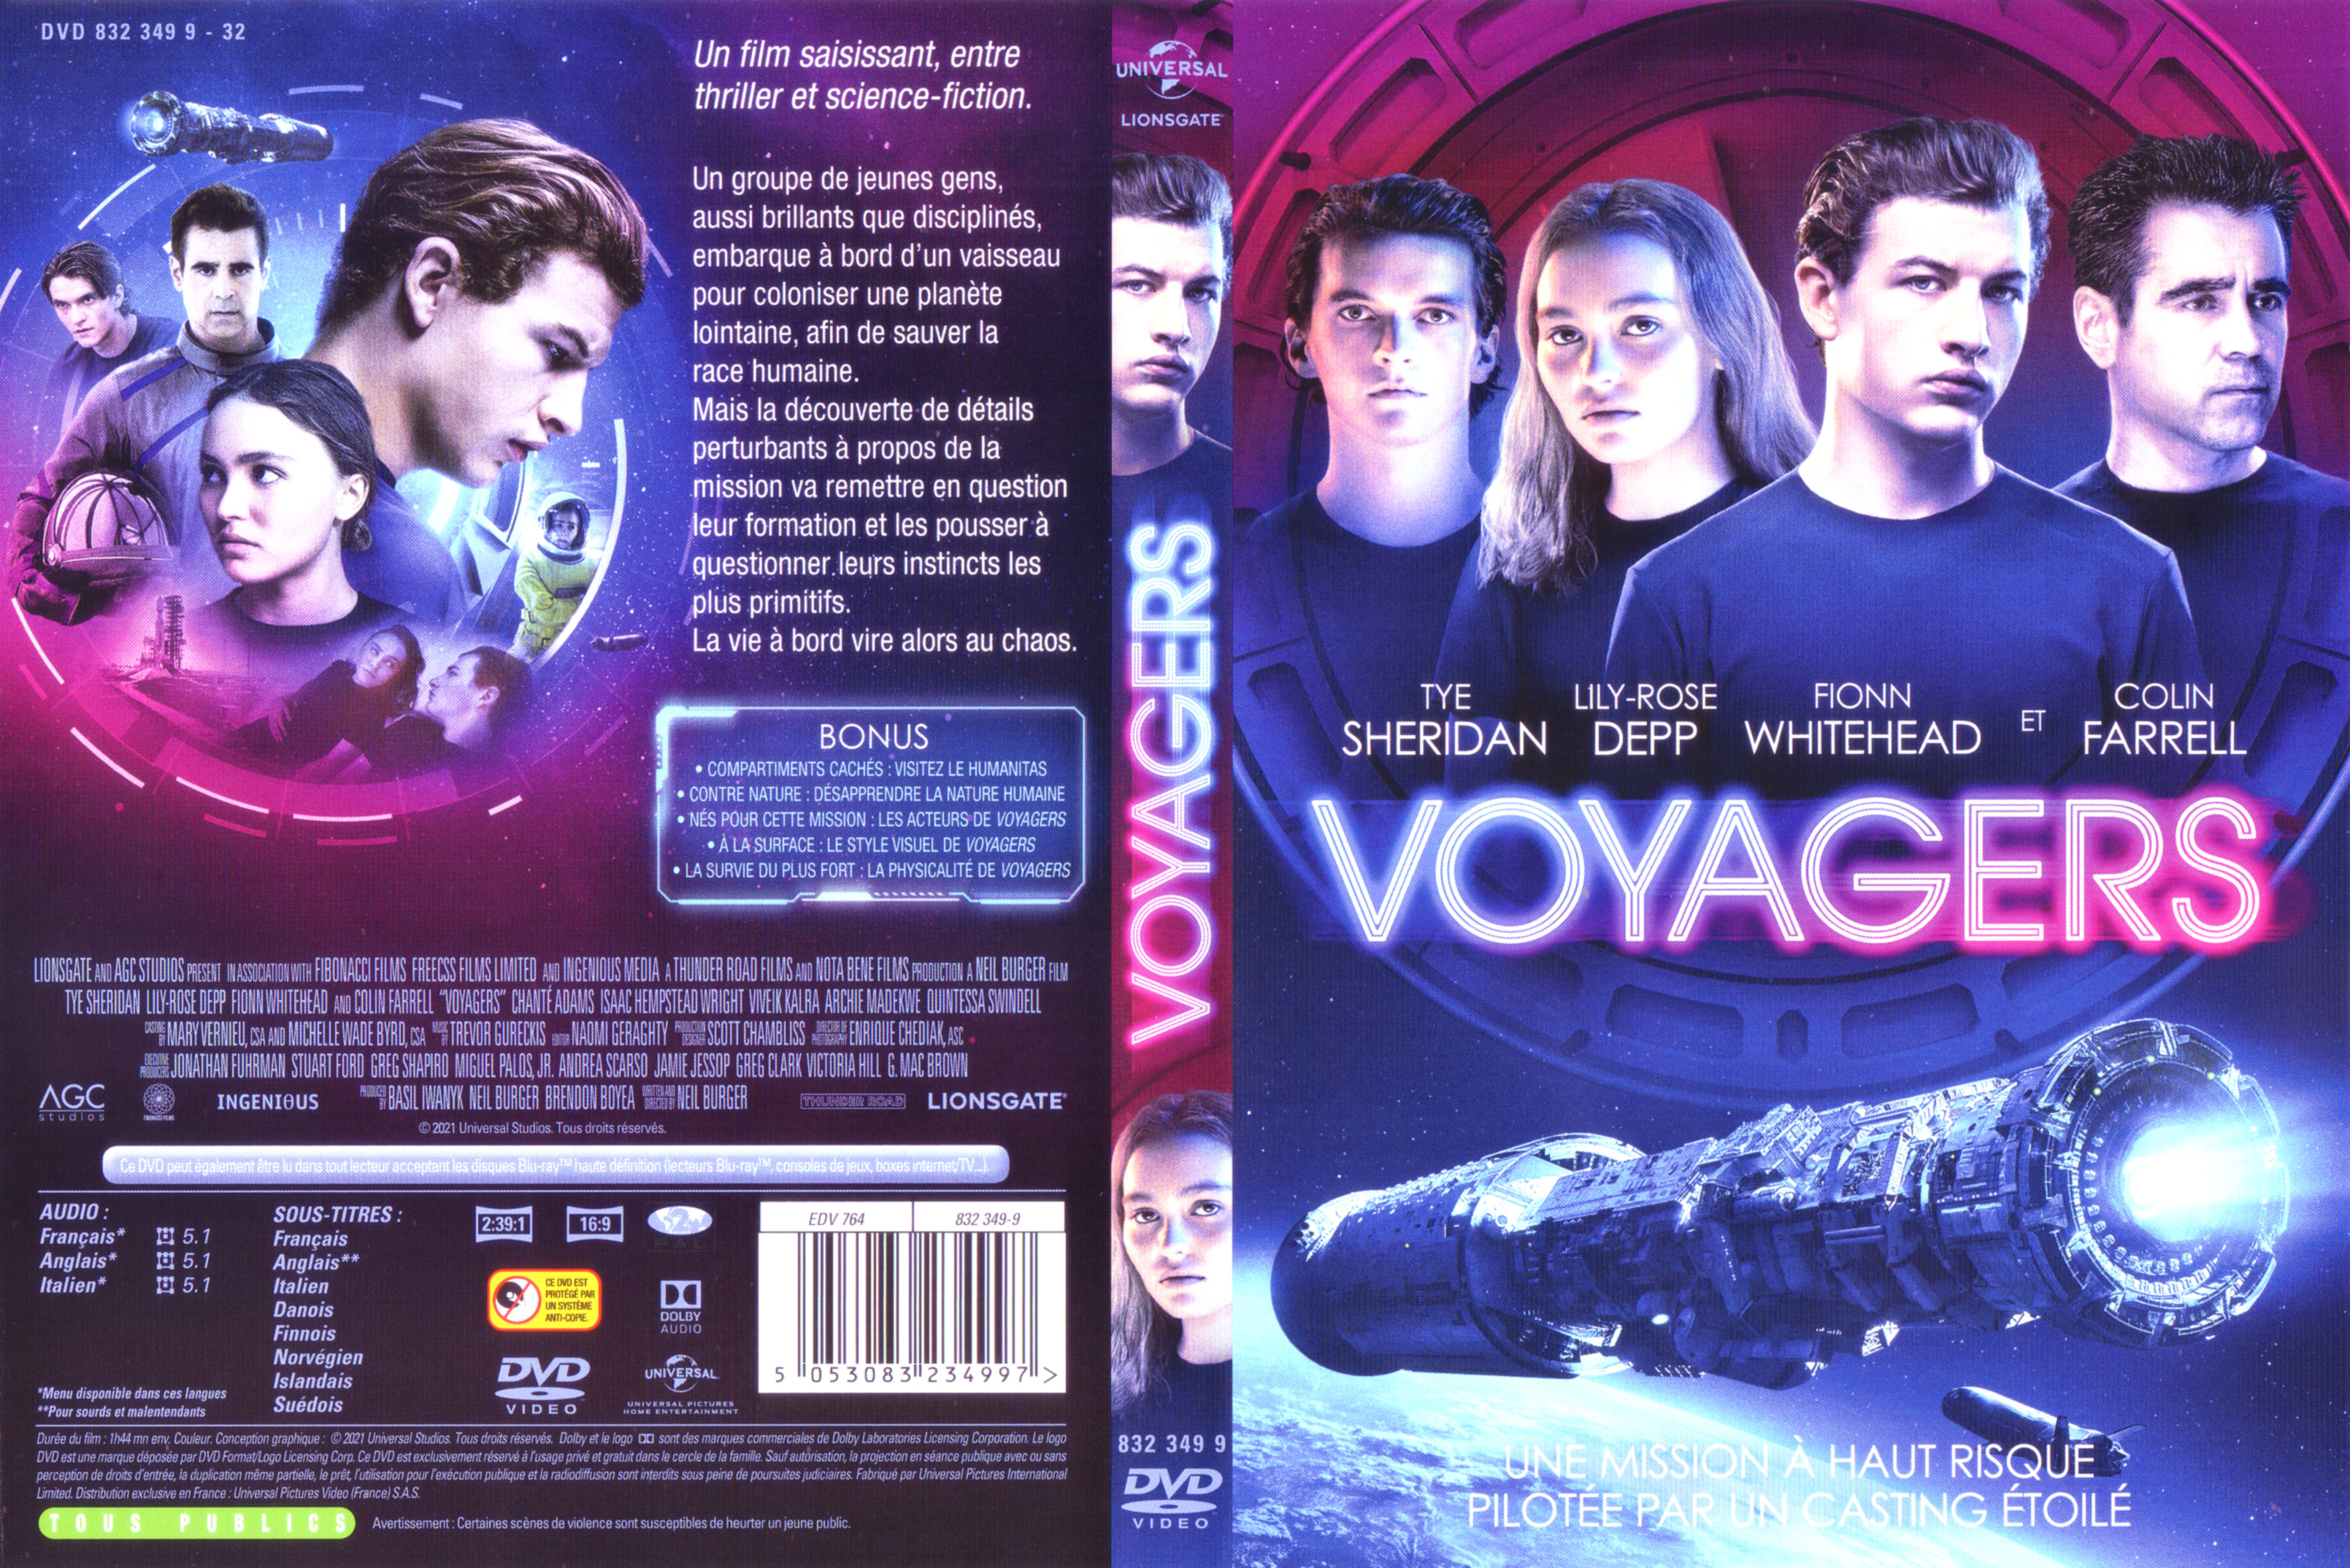 Jaquette DVD Voyagers